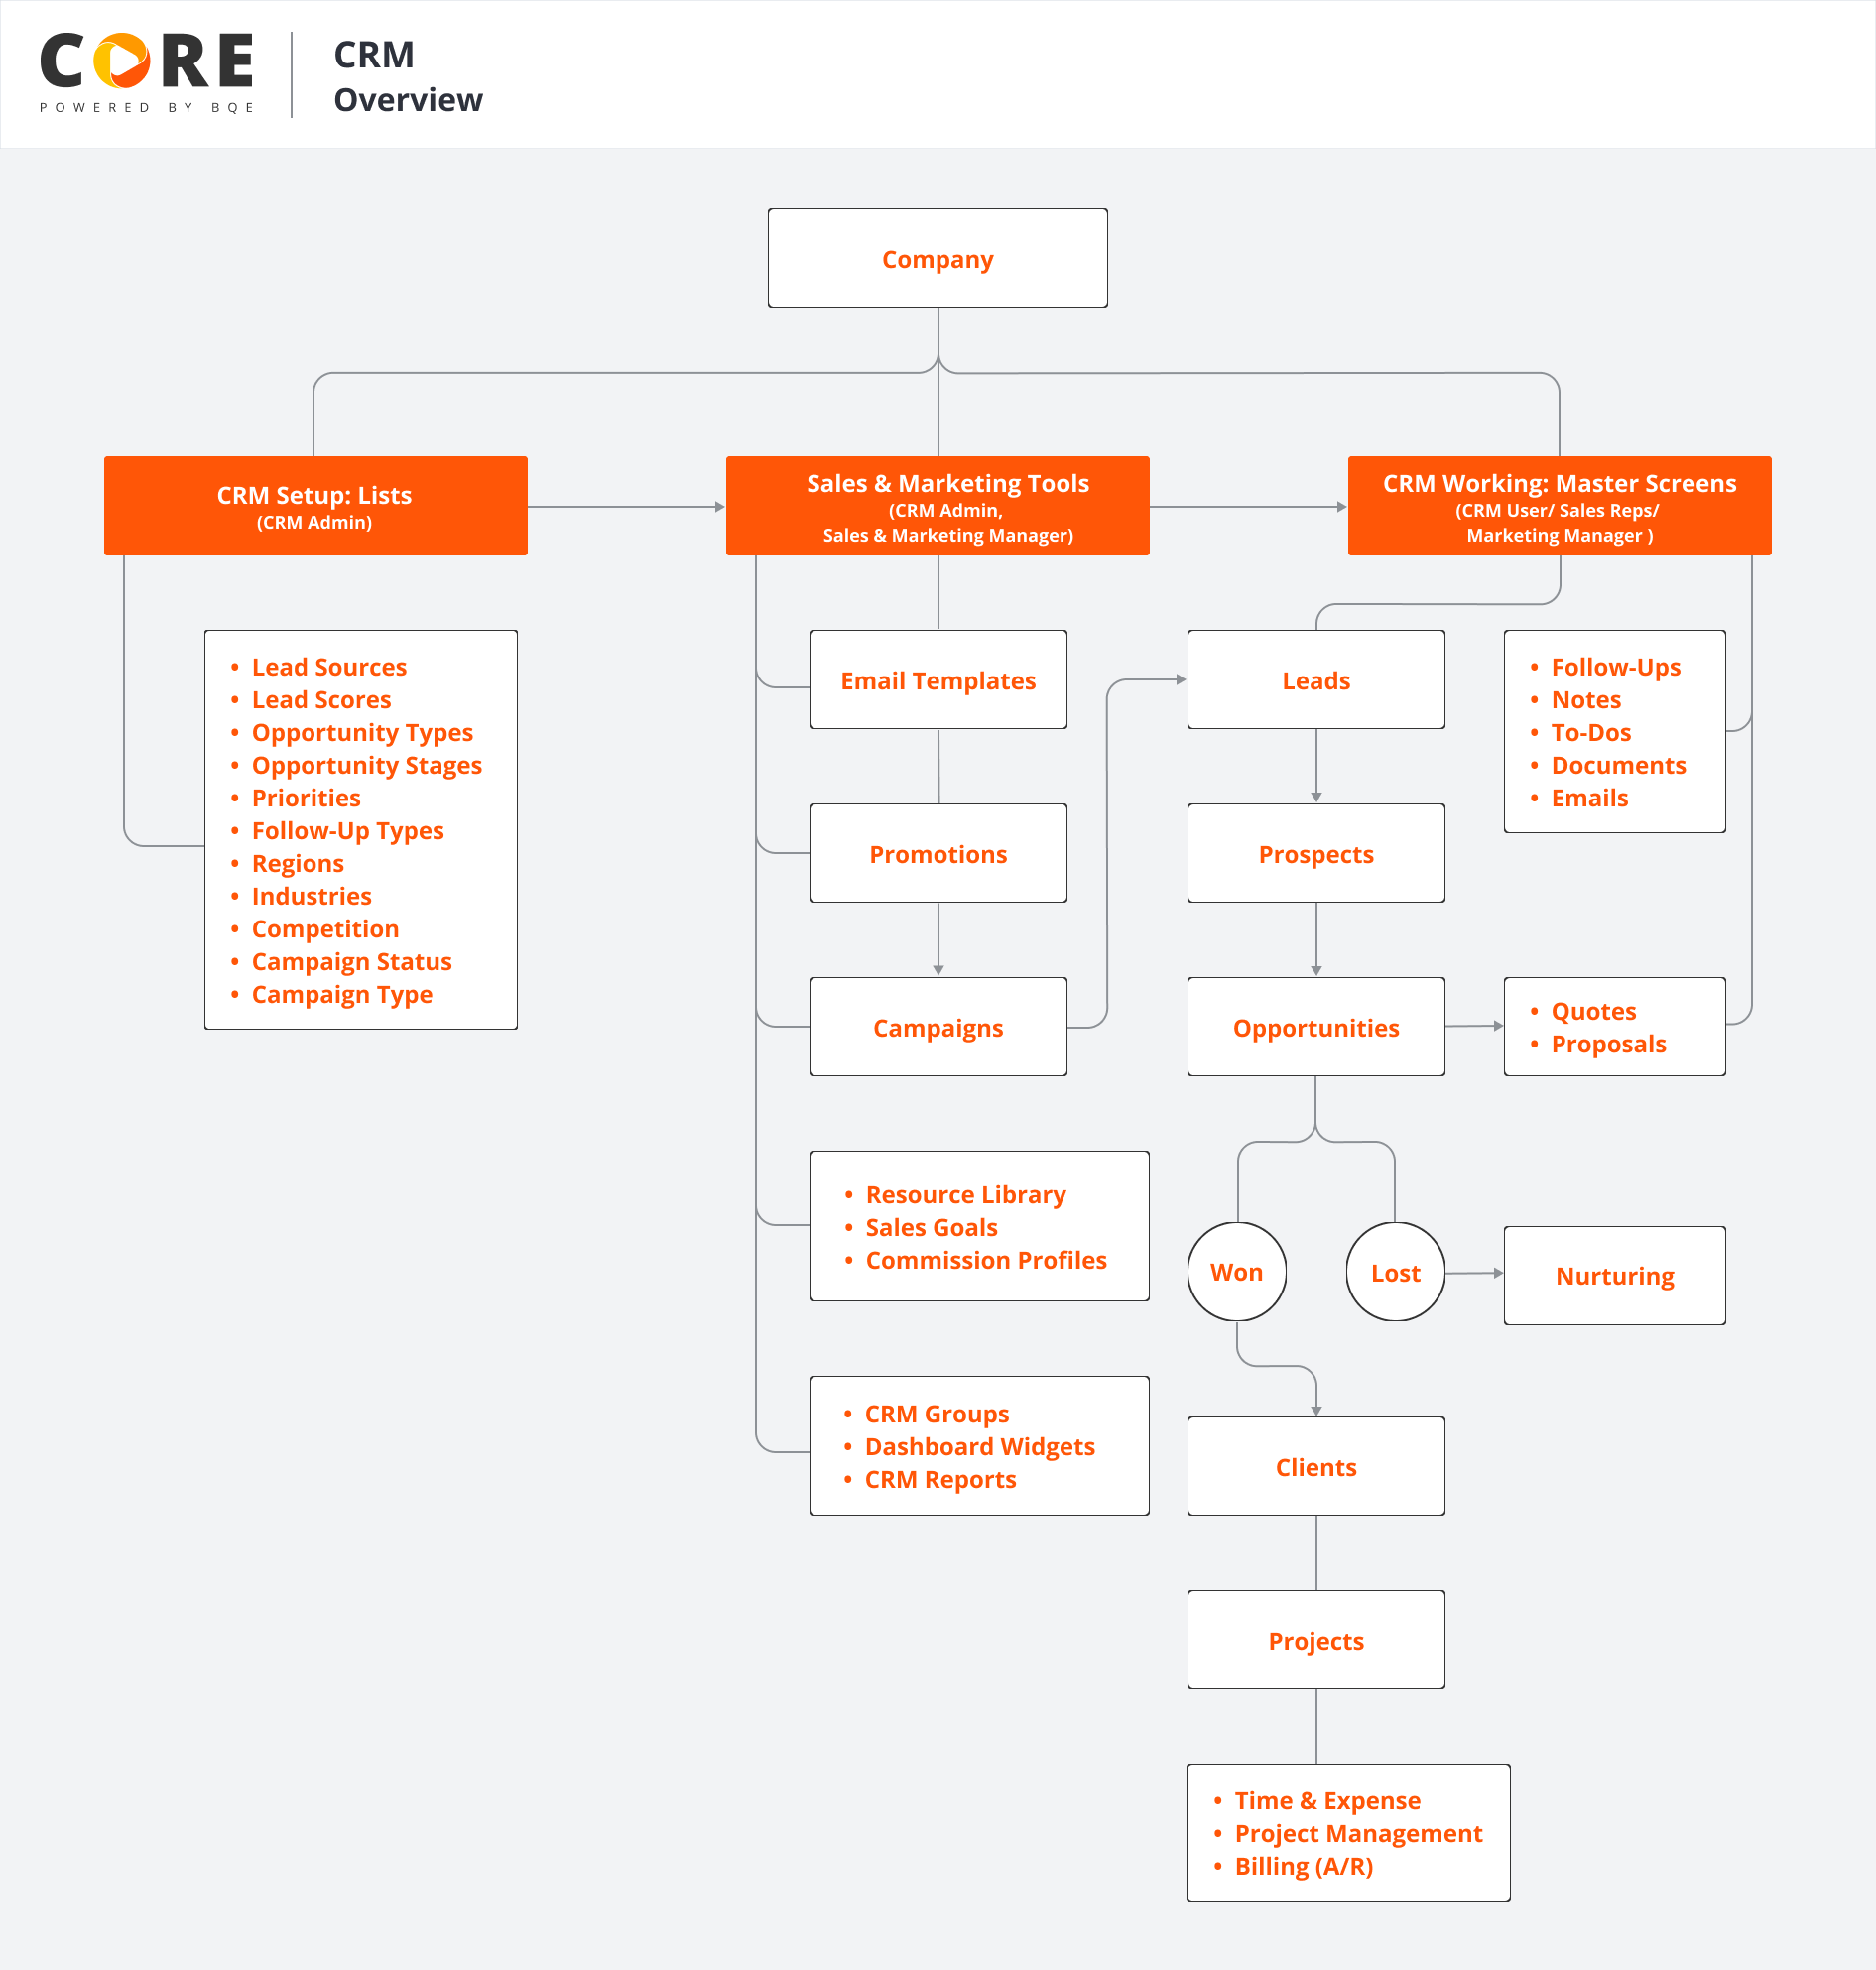 CRM_Overview.png